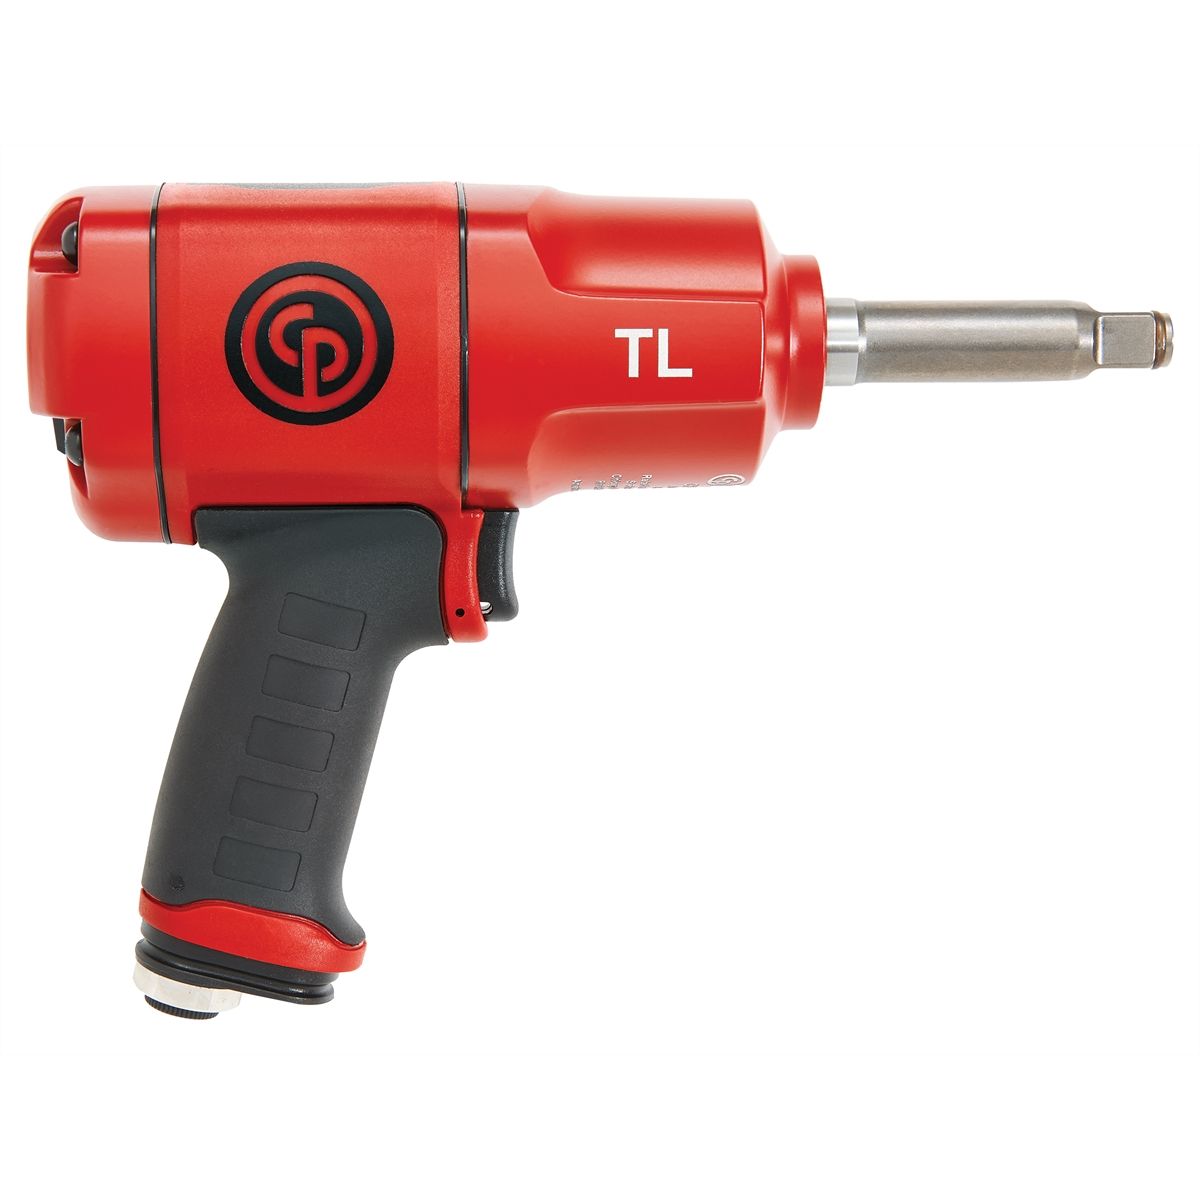 CP7748TL2 1/2 Inch Torque Limited Impact Wrench w 2 Inch Anvil